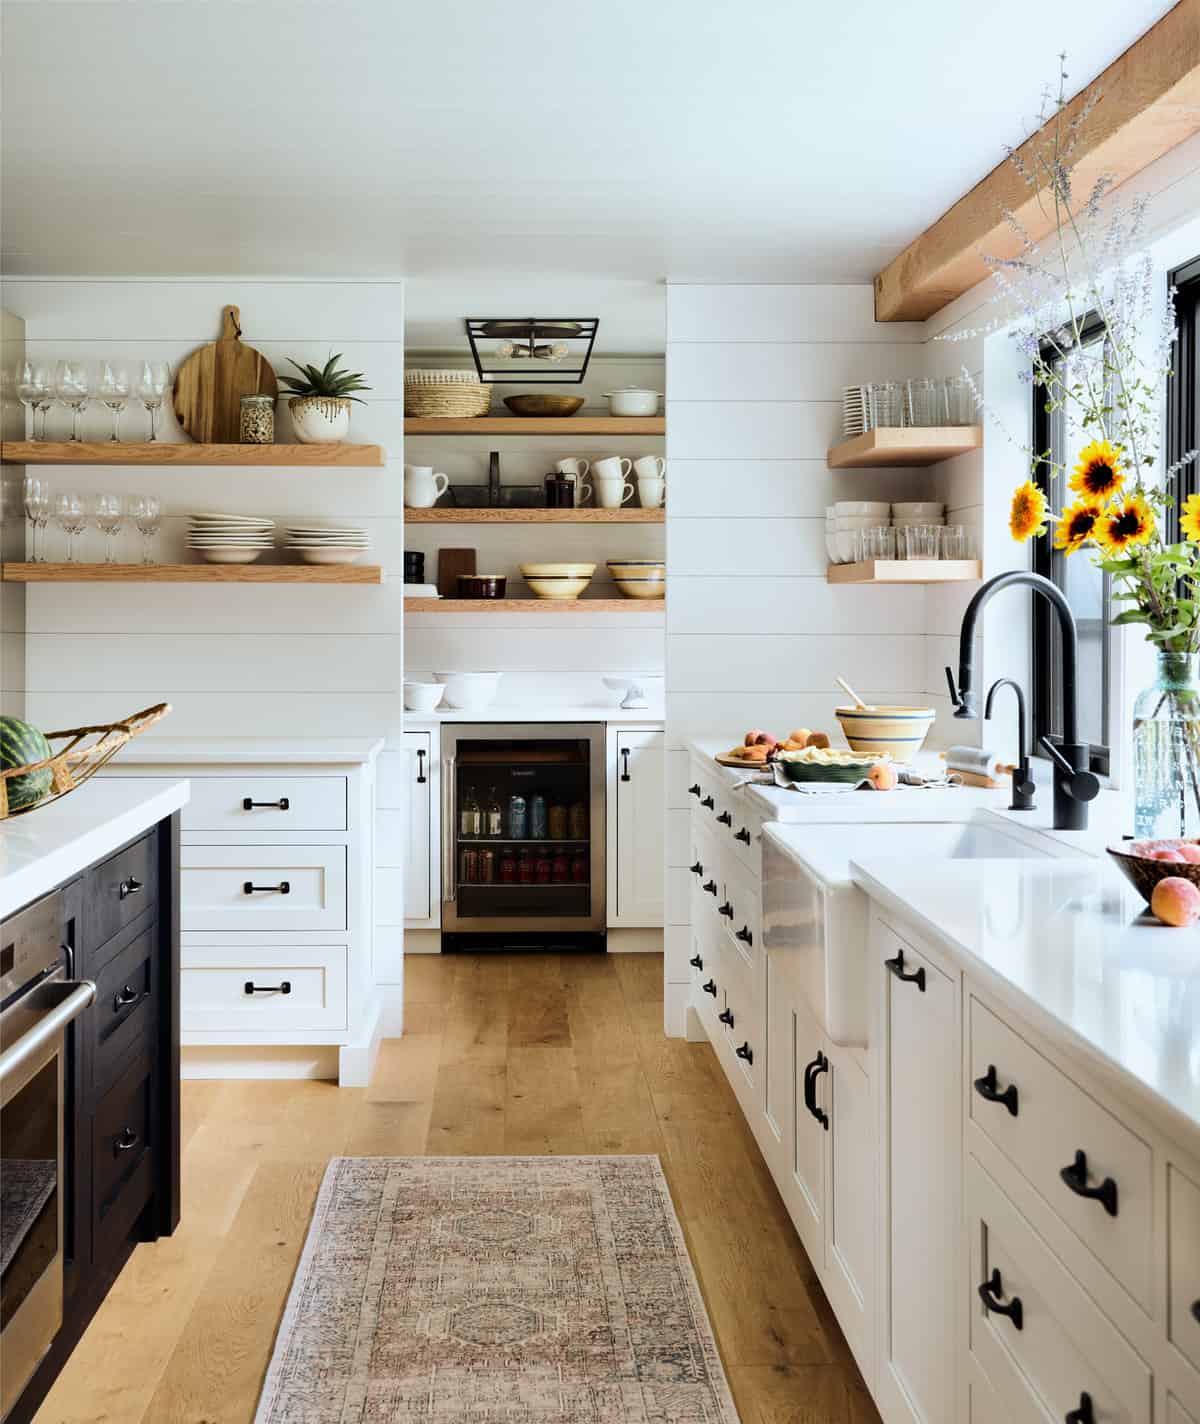 This kitchen was renovated as part of a whole house transformation.  A new walk-in pantry is tucked away where the original center chimney was removed.